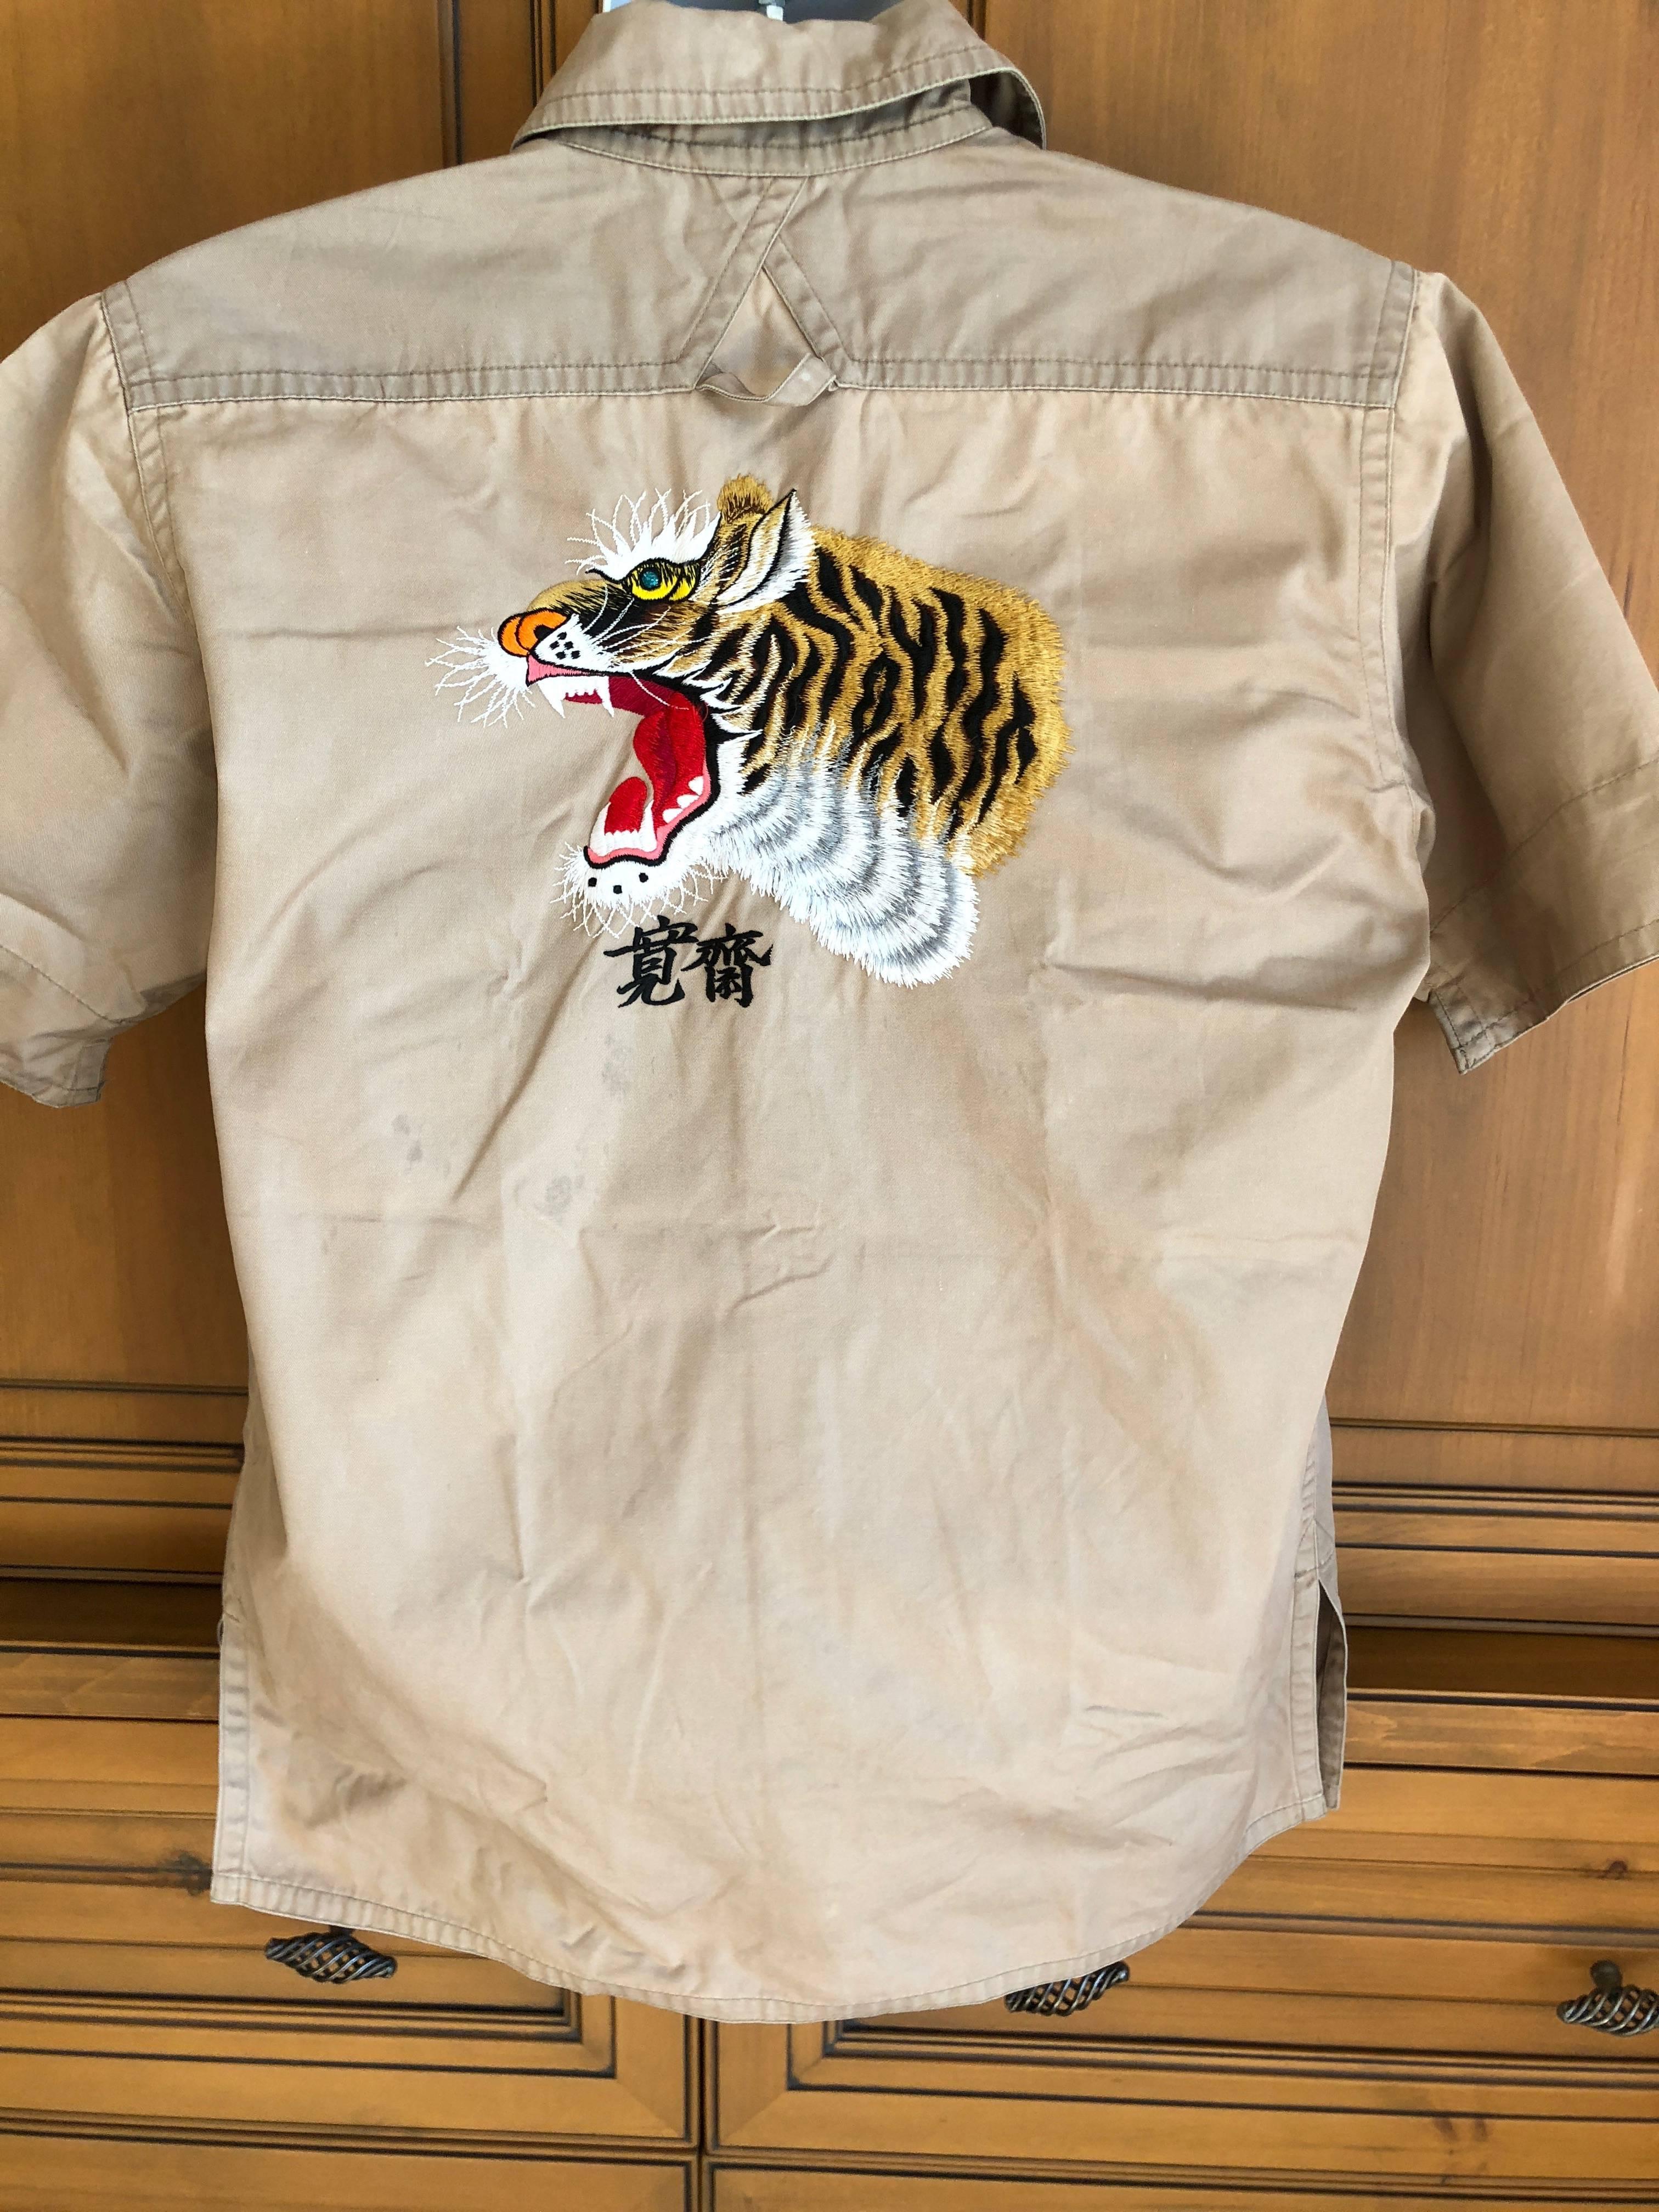 Kansai Yamamoto Khaki Men's Military Shirt with Tiger Embroidery In Good Condition For Sale In Cloverdale, CA